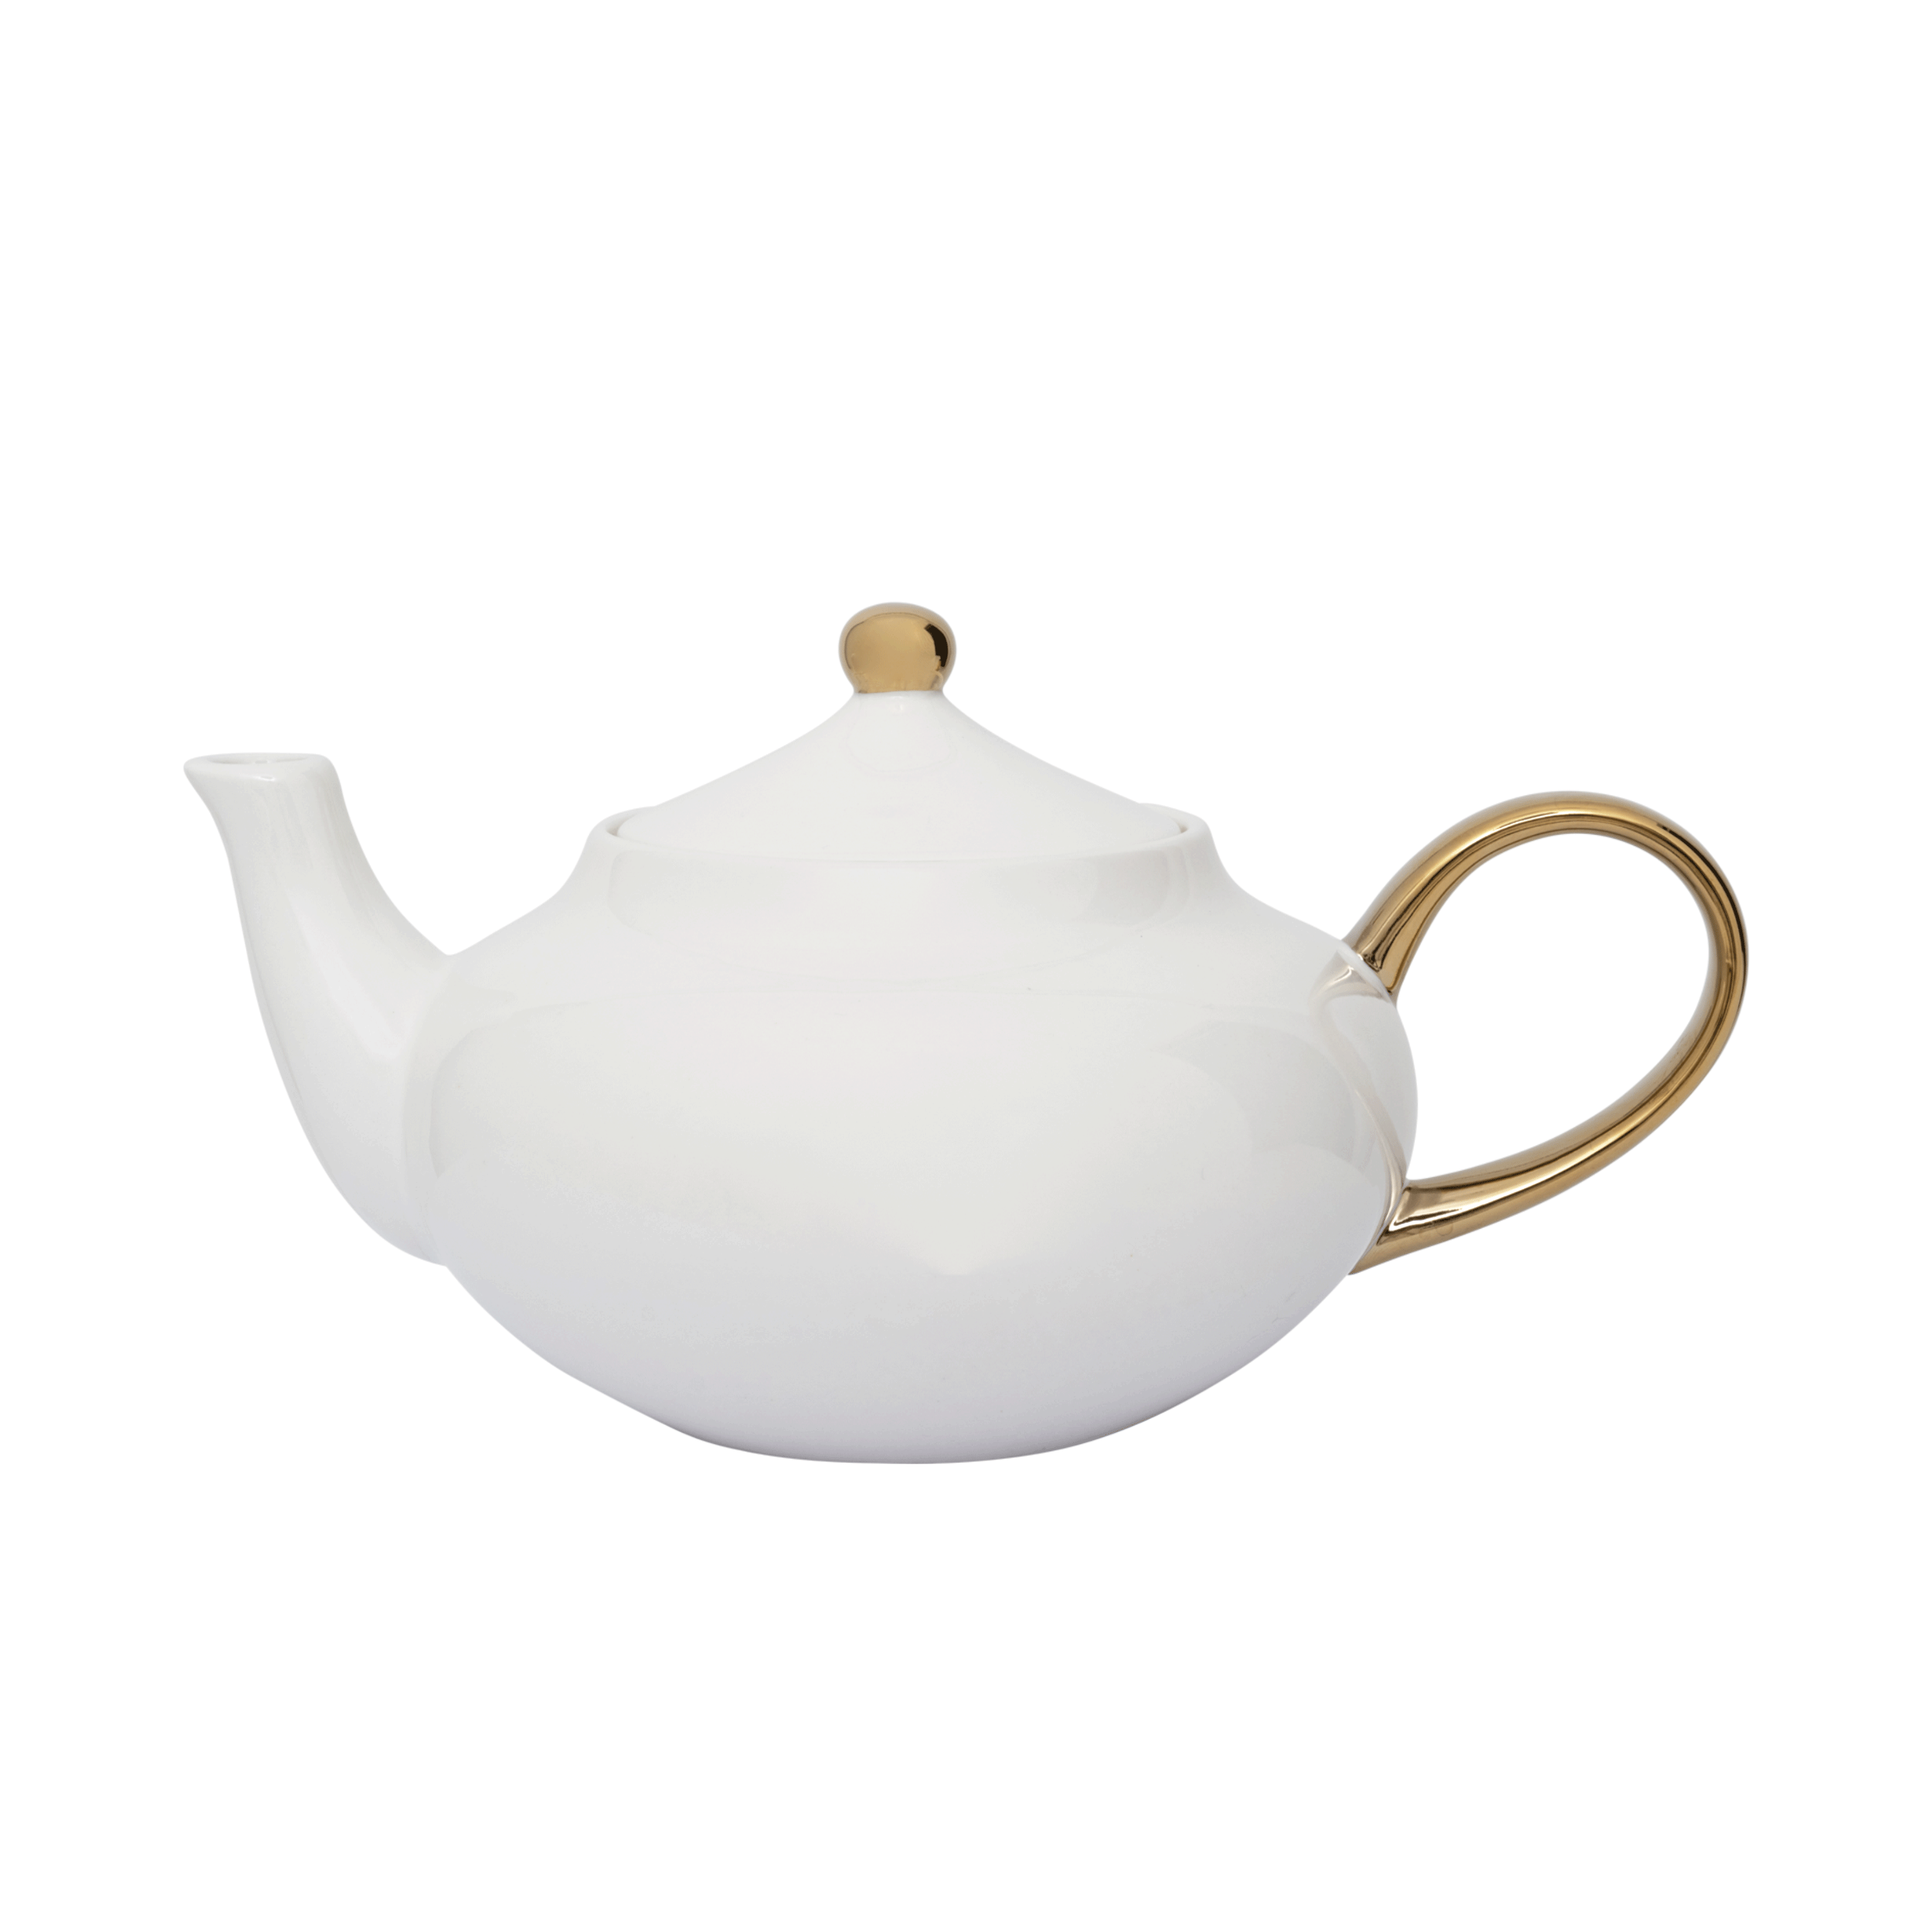 Unc Good Morning Tea Pot White And Gold Gift